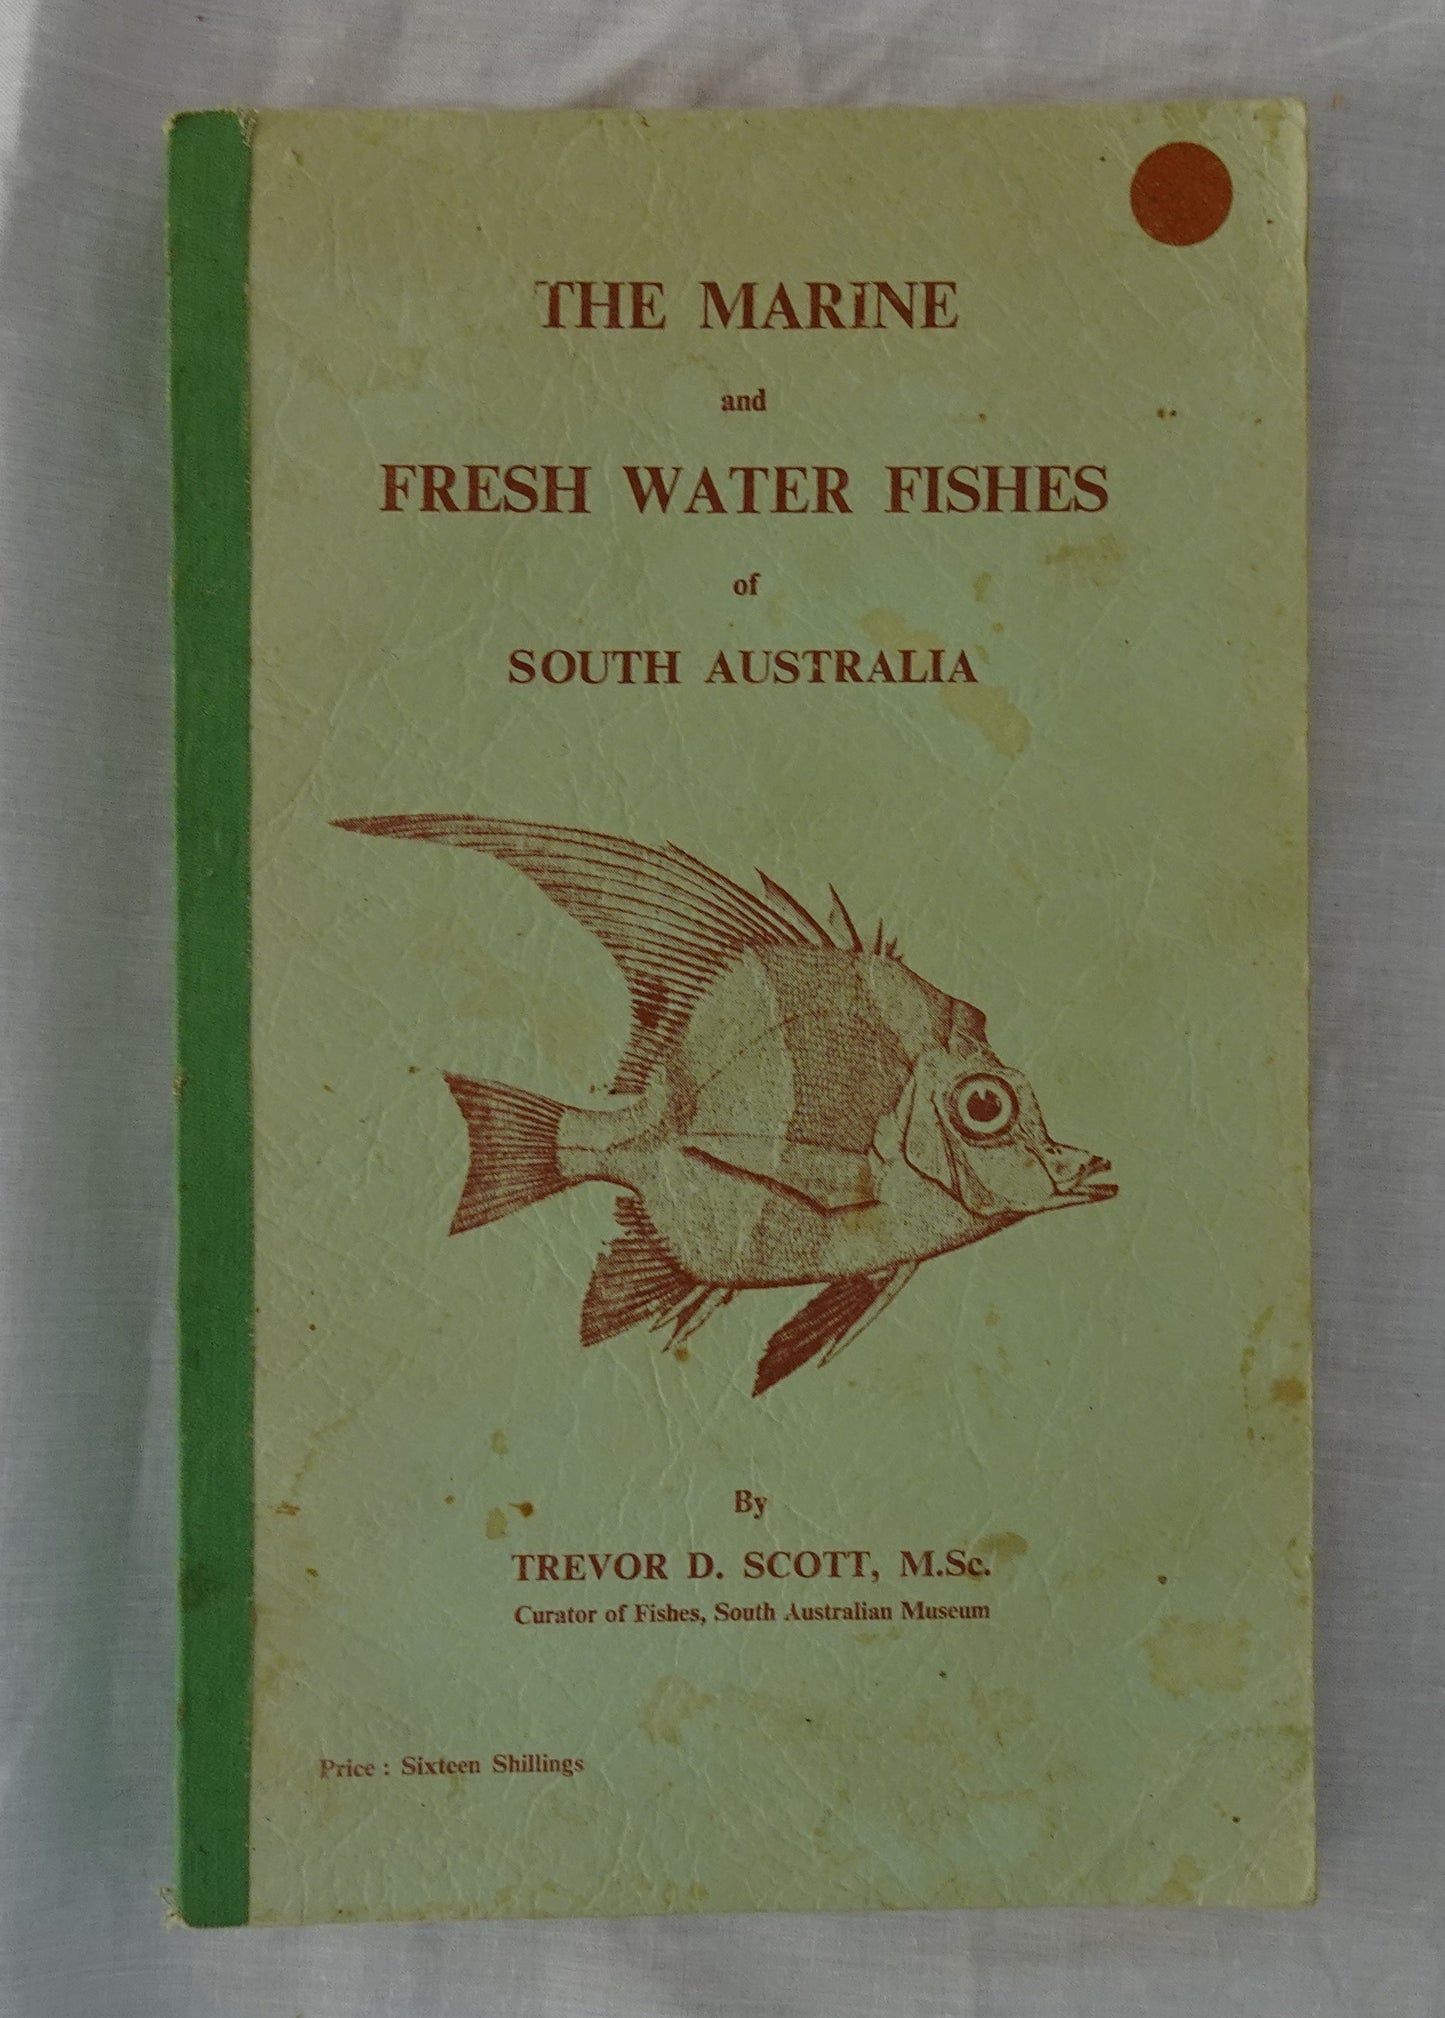 The Marine and Freshwater Fishes of South Australia  By Trevor D. Scott